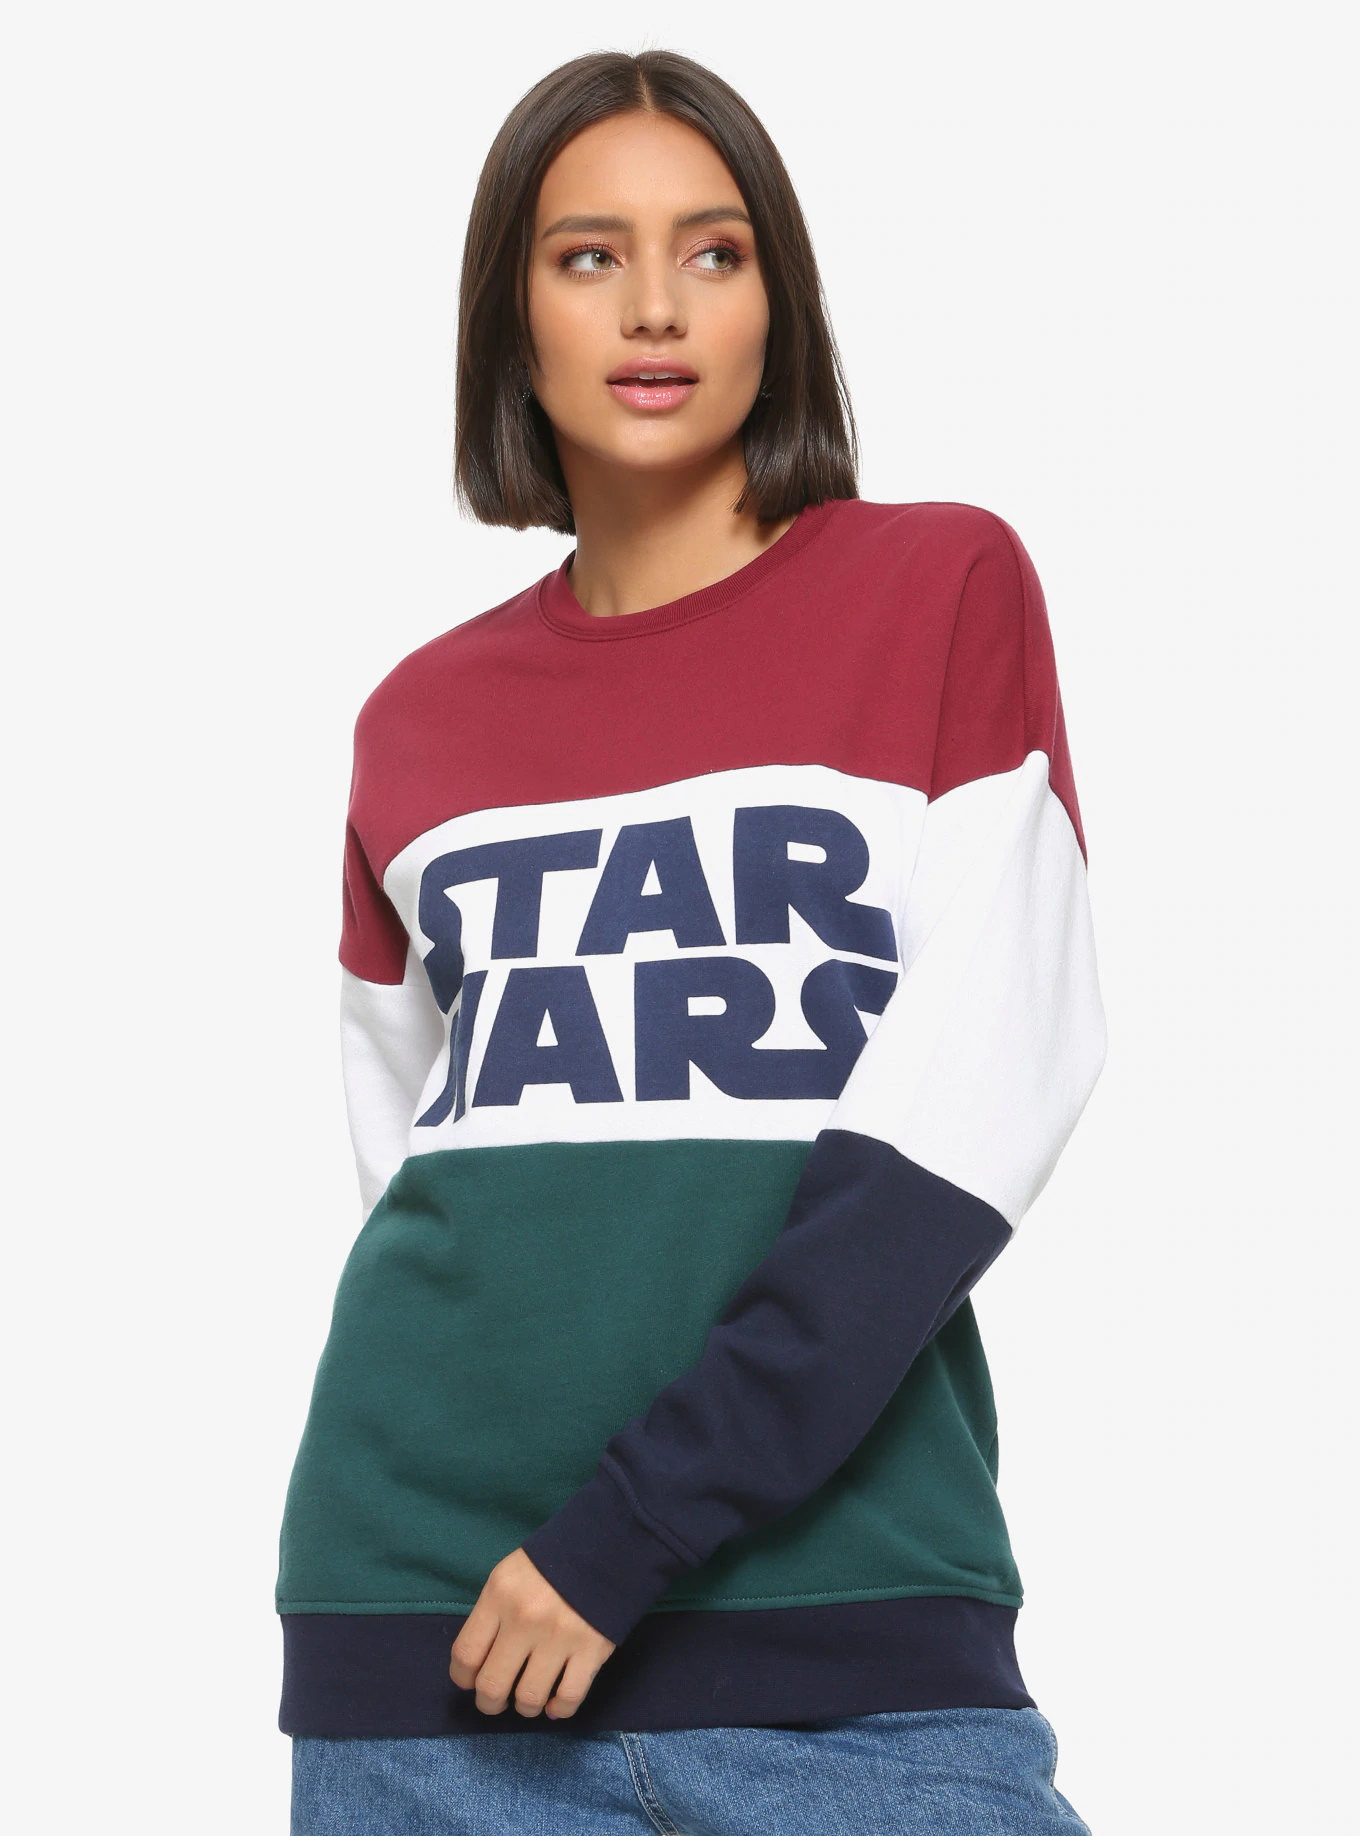 Our Universe Star Wars Color Block Sweatshirt at Her Universe